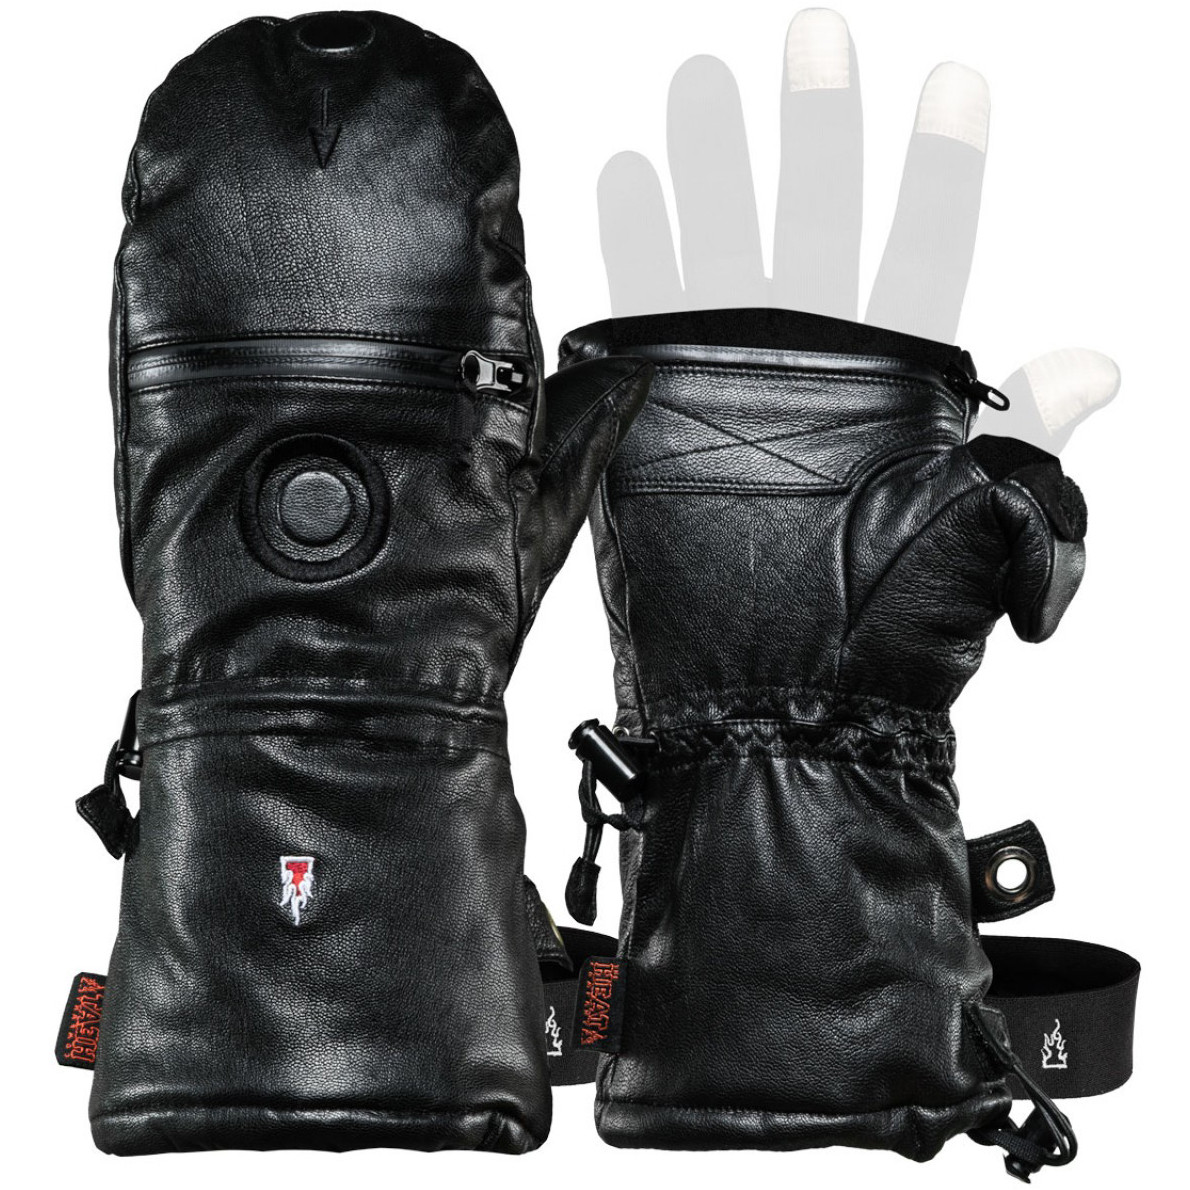 https://cdn10.bigcommerce.com/s-x49v3p/products/2010/images/13692/leather-shell-heat3-winter-photography-gloves-front__80449.1537906263.1280.1280.jpg?c=2